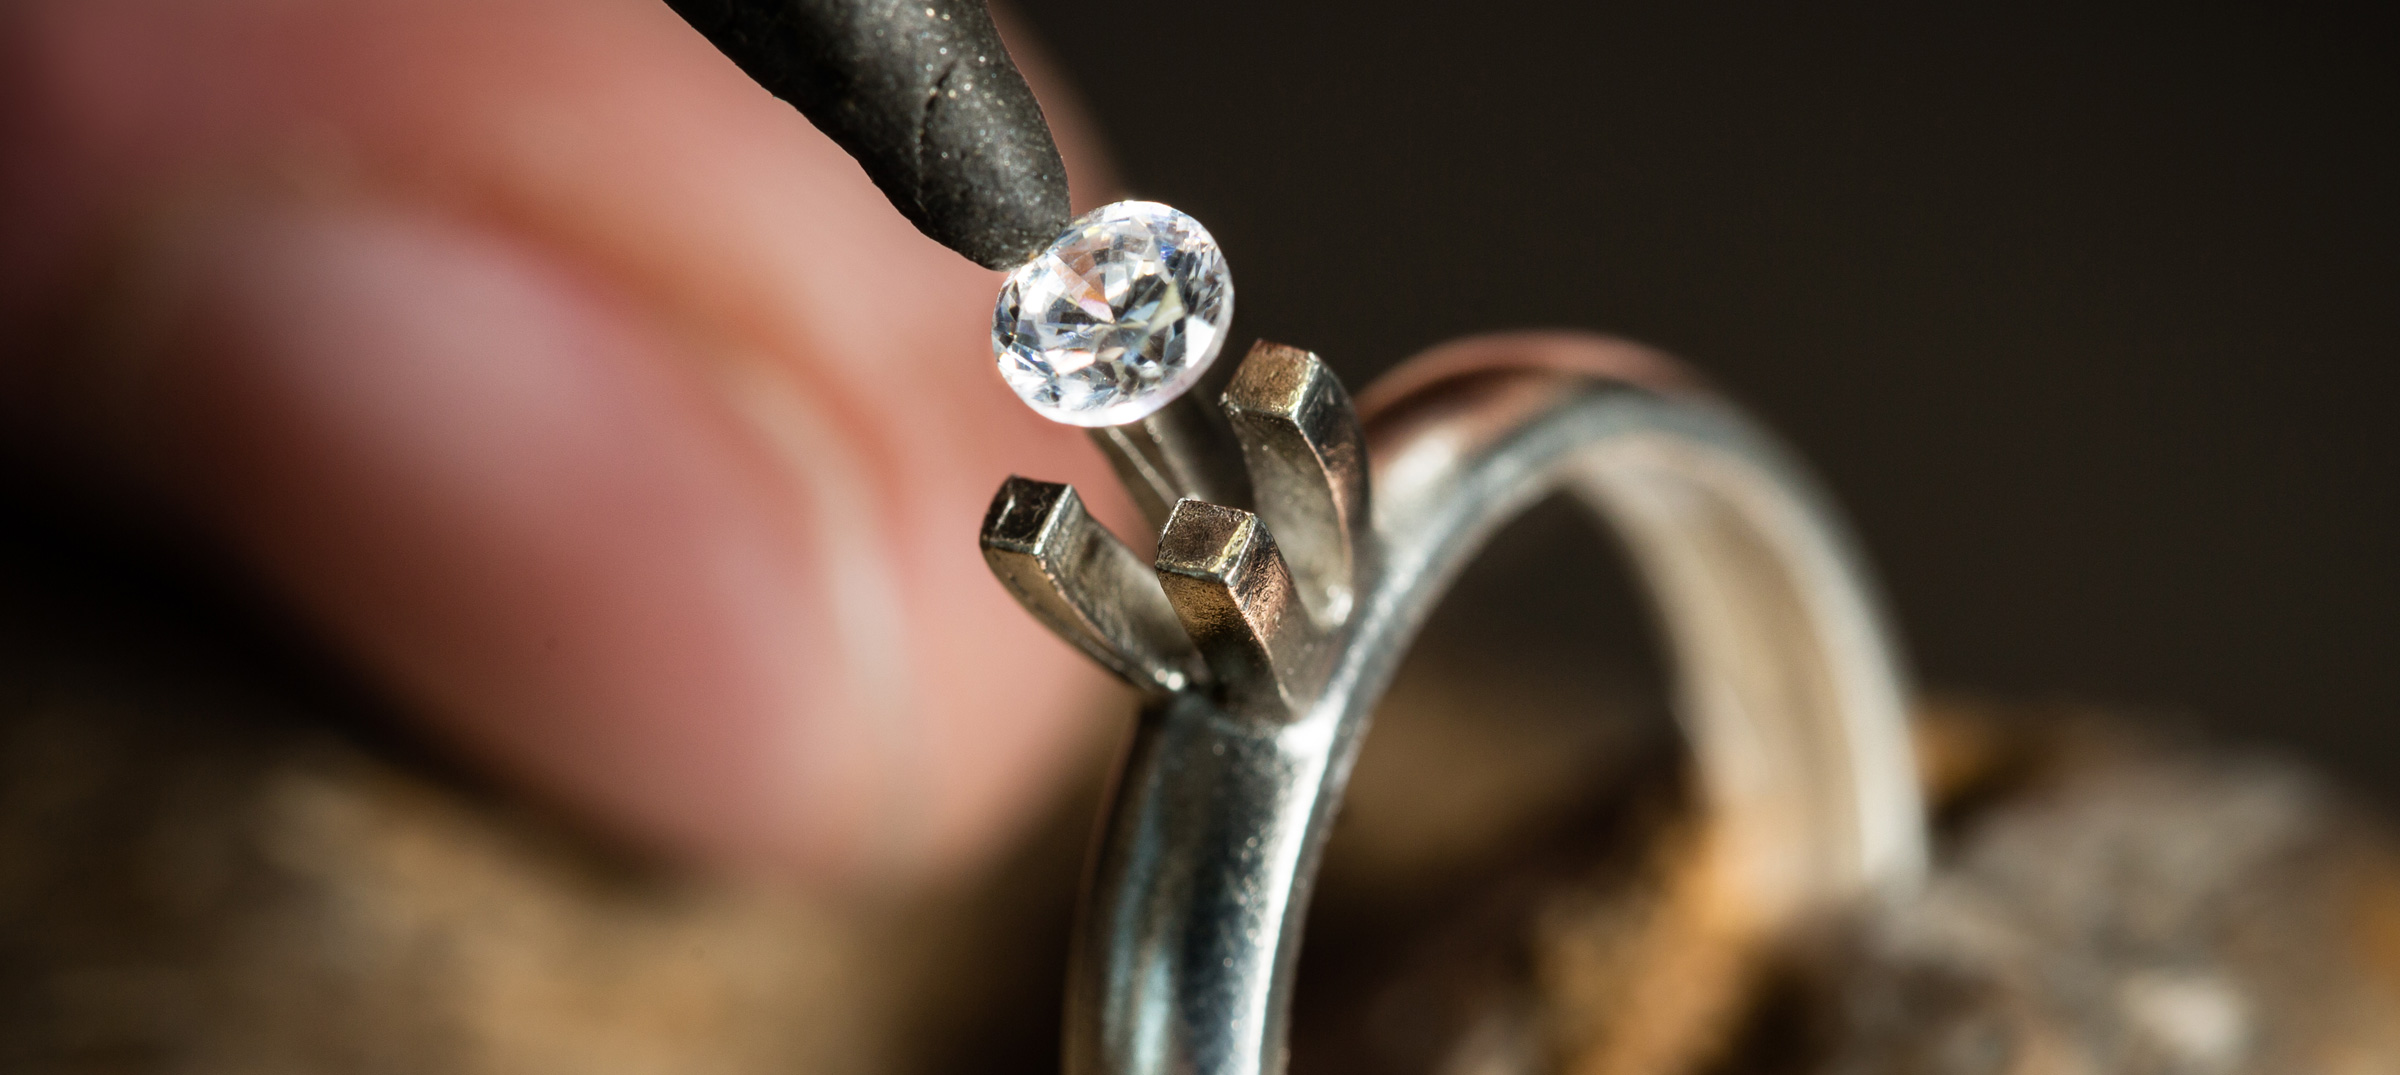 Why are lab-grown diamonds trending